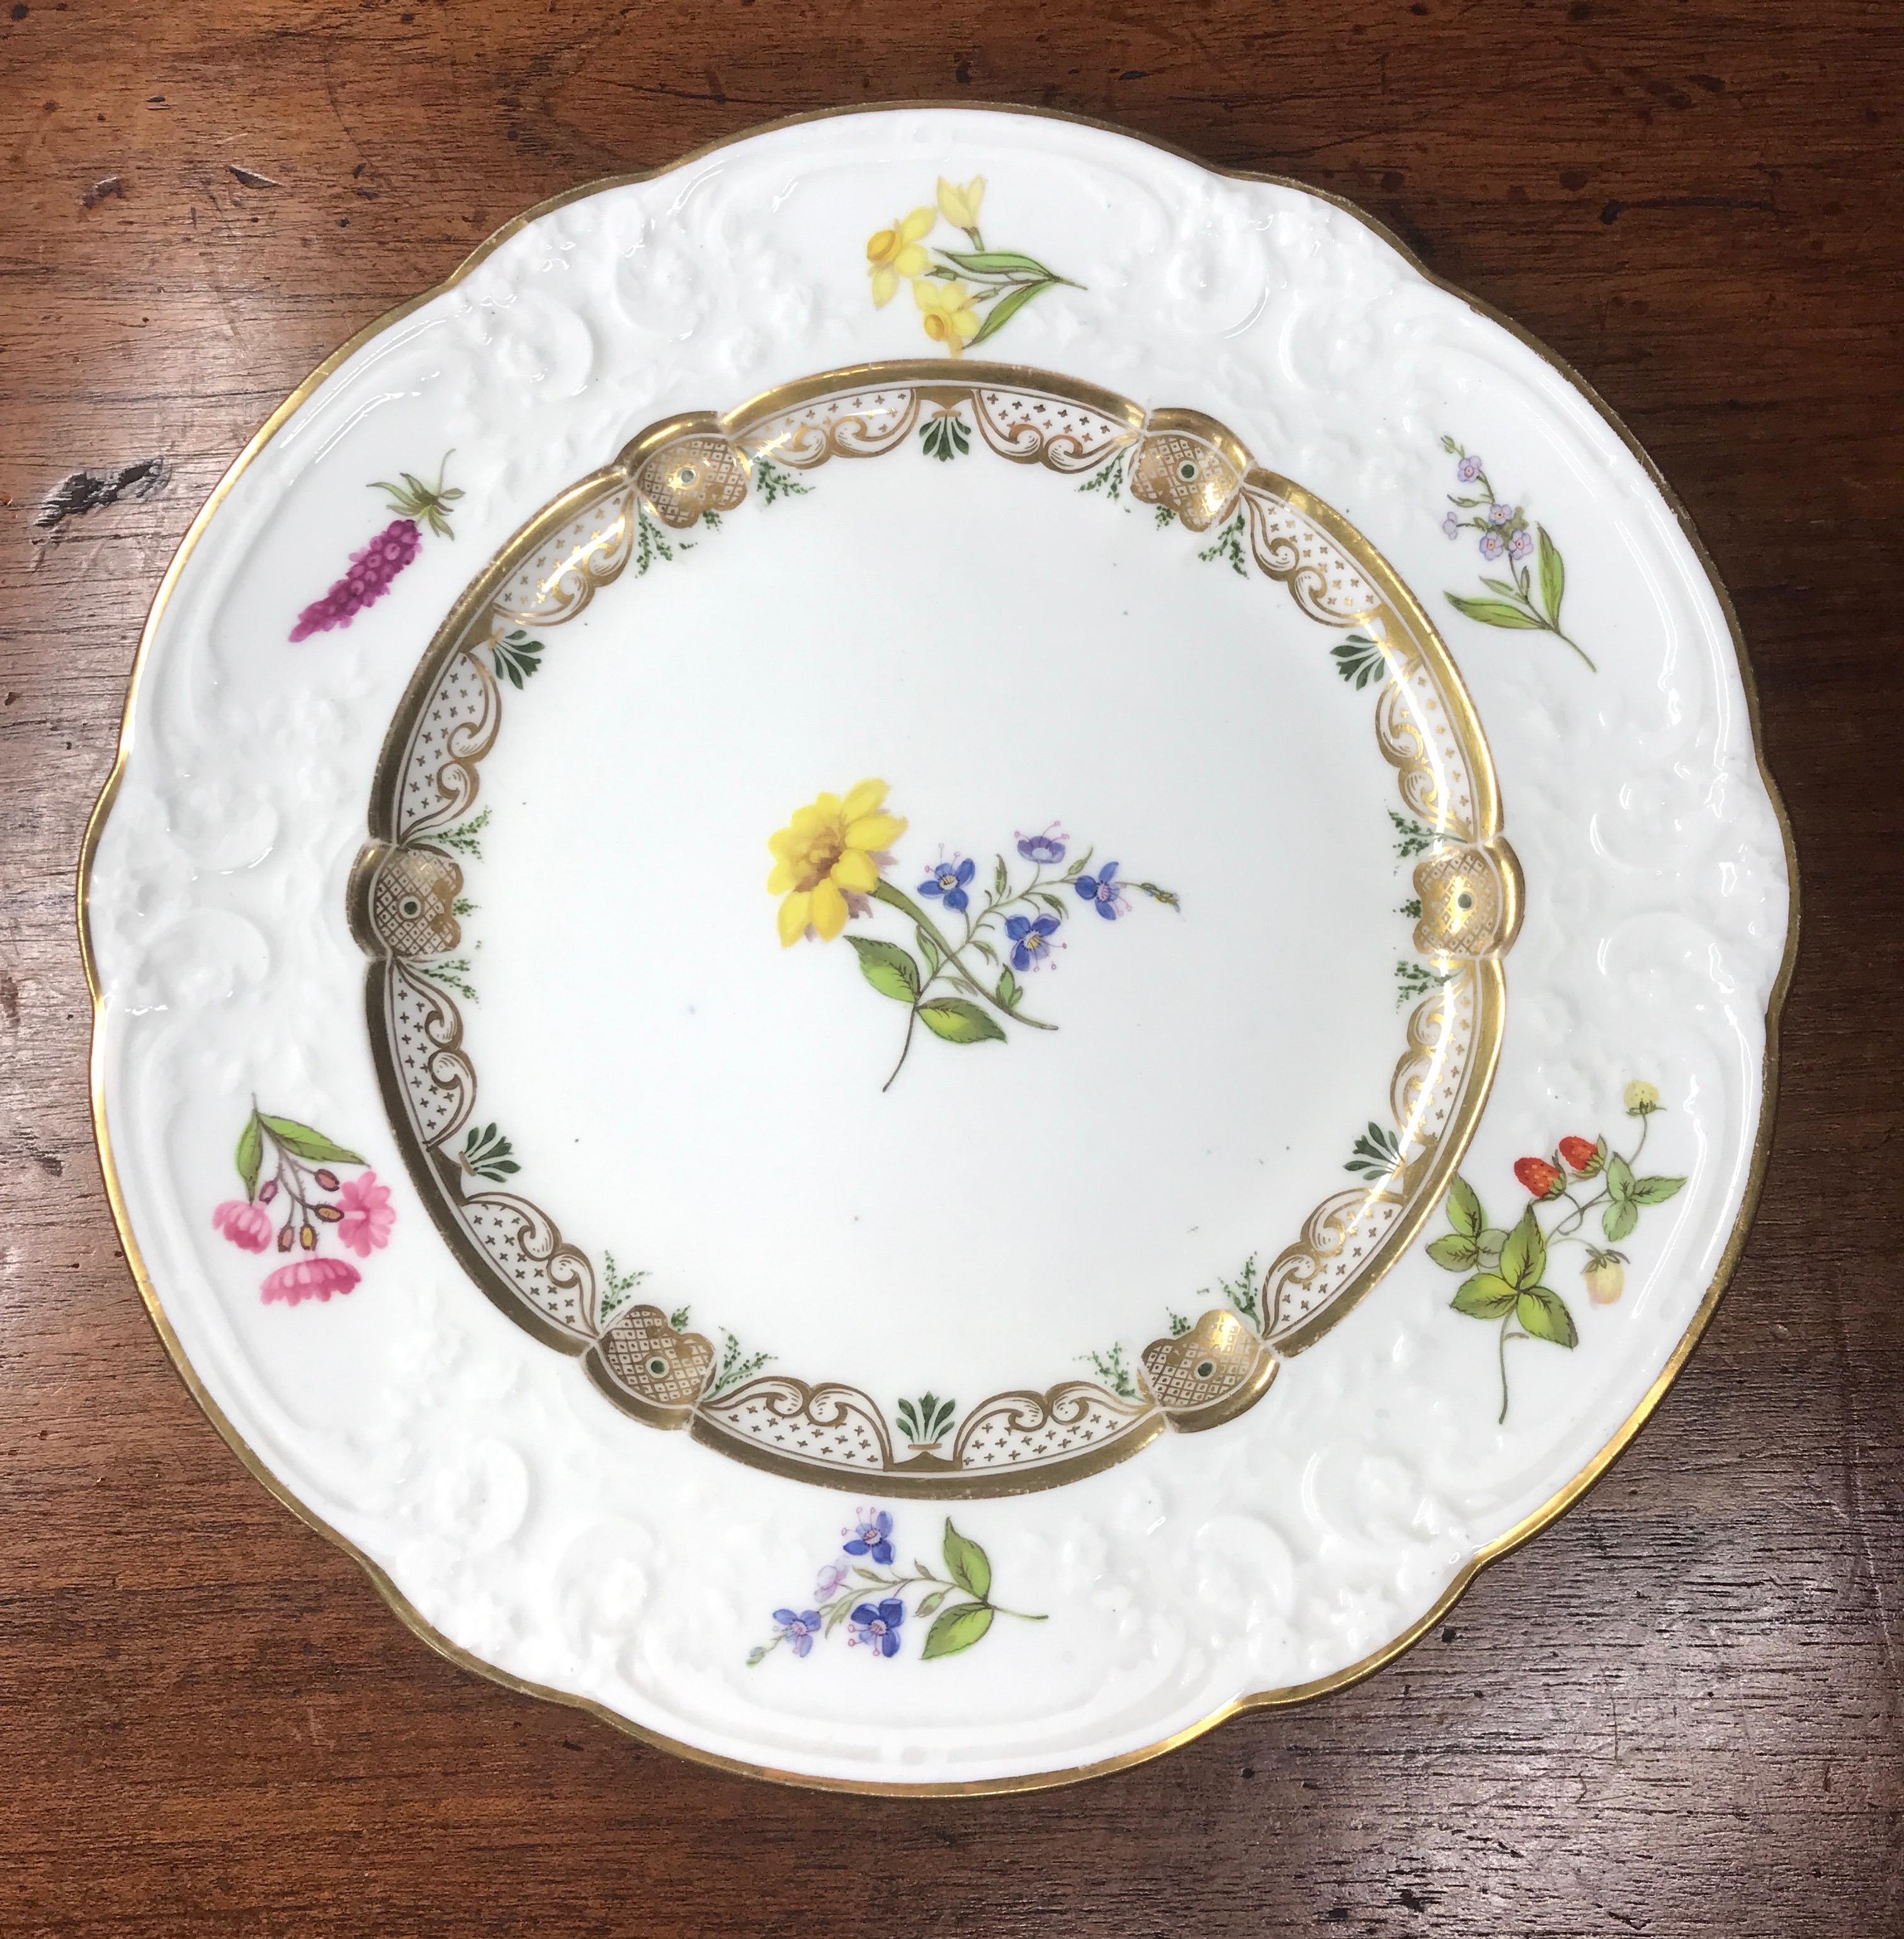 Swansea Porcelain dessert plate, well painted with flower specimens including strawberries and daffodils, the rim with Fine c-scroll and wreath moulding, the shoulder with gilt scroll border including verdant green leaves. 

Red SWANSEA stamp,